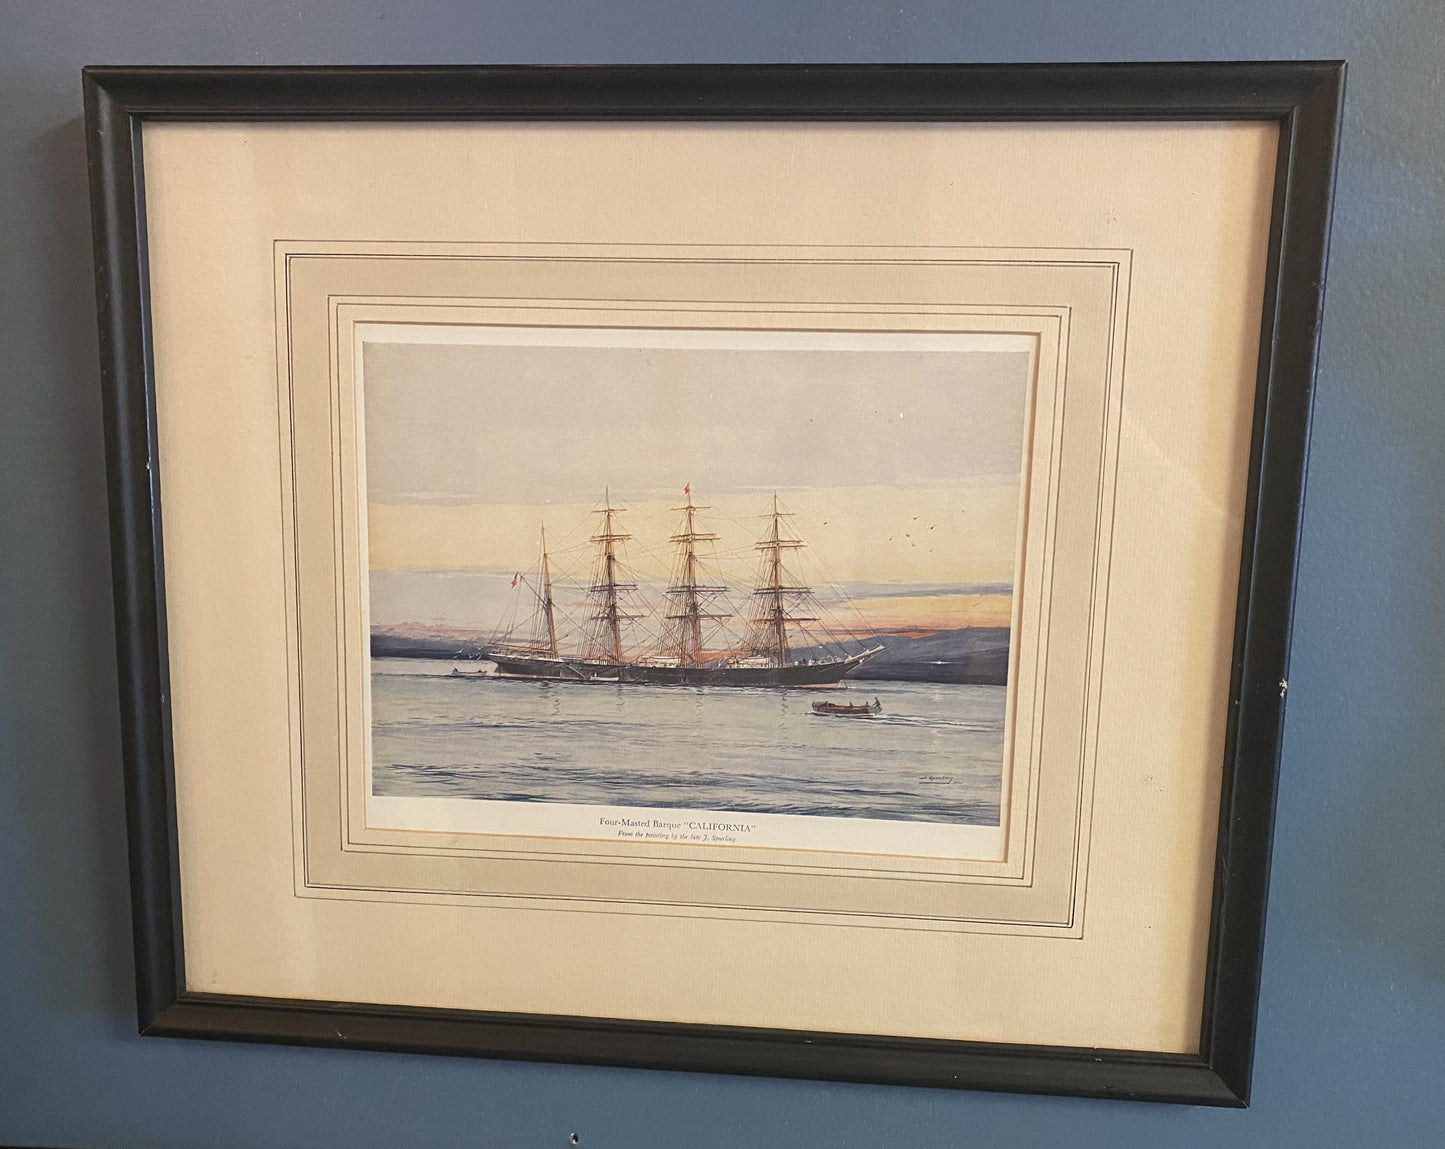 Jack Spurling Painting of Four-master Barque "California"